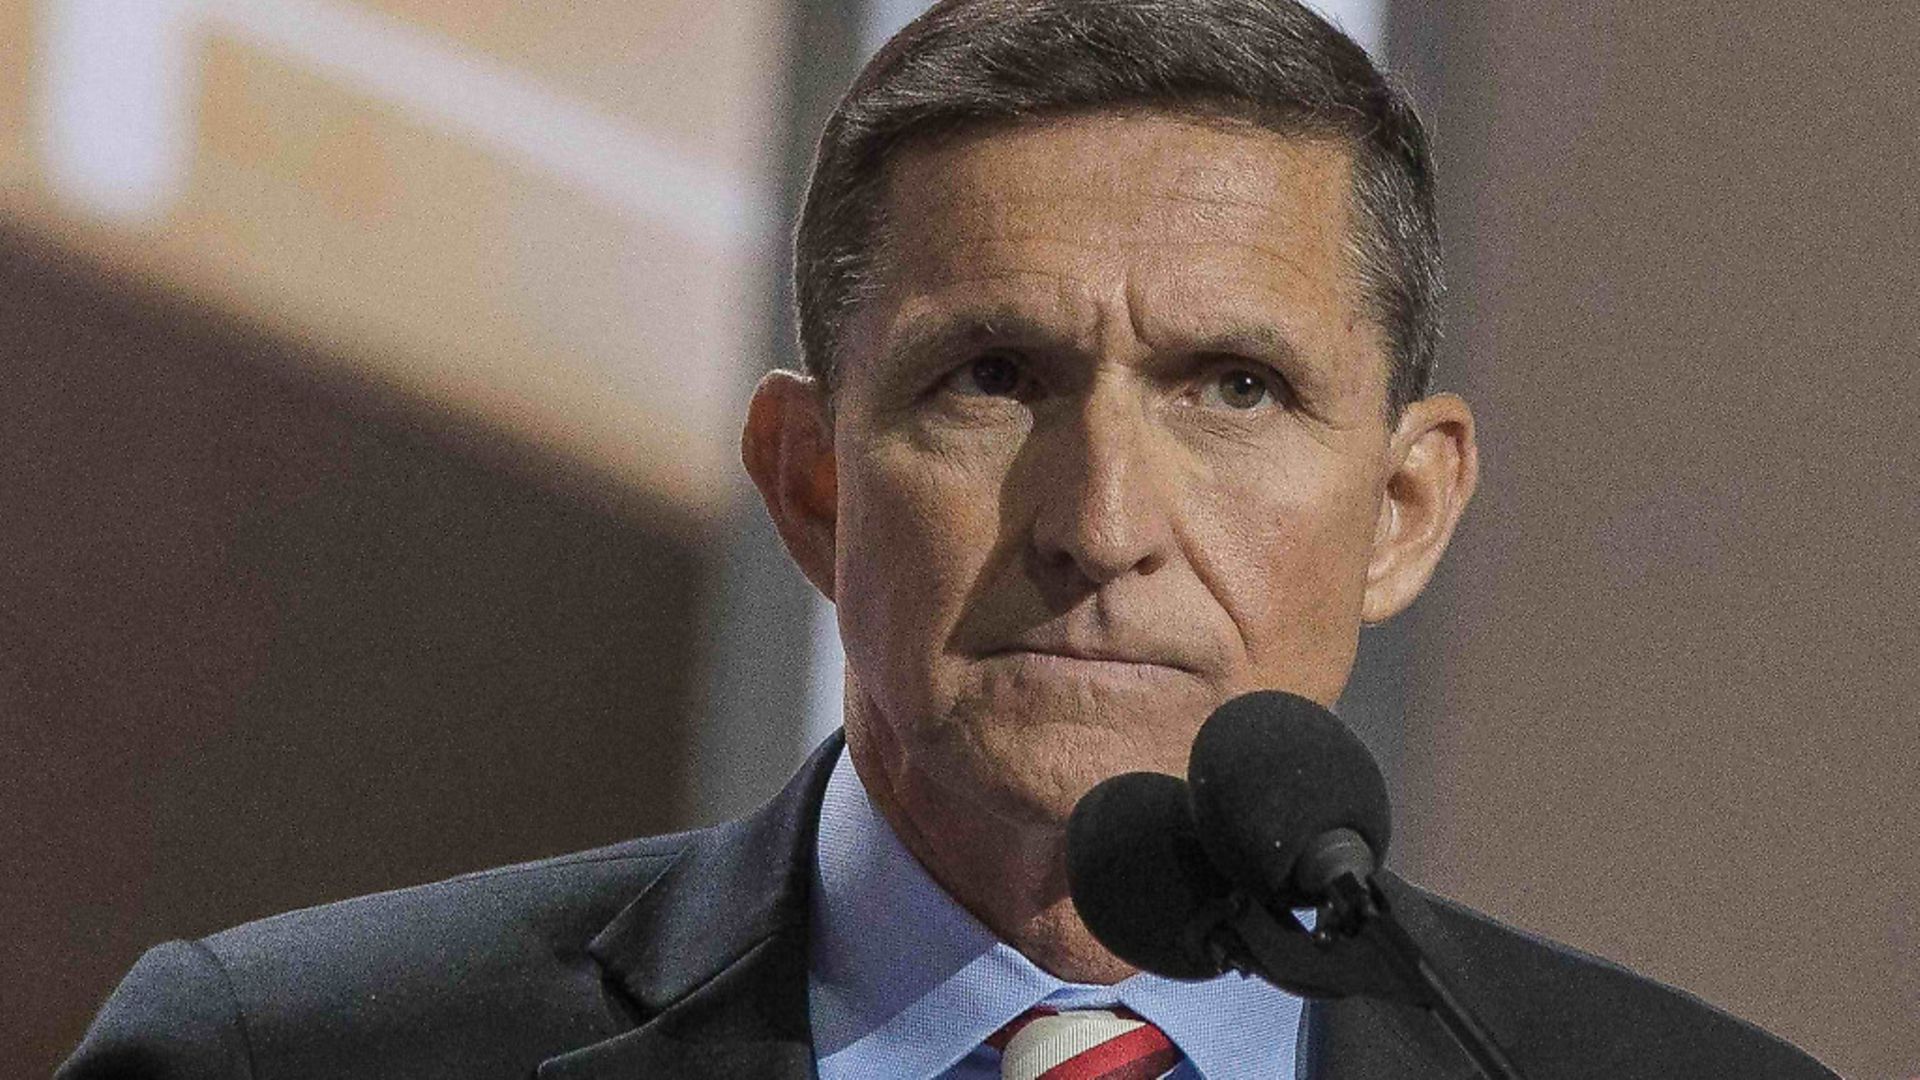 Former U.S. National Security Adviser Michael Flynn pleaded guilty to lying to the FBI regarding his improper contacts with Russia. Picture: Mark Reinstein via Zuma Wire - Credit: Zuma Press/PA Images